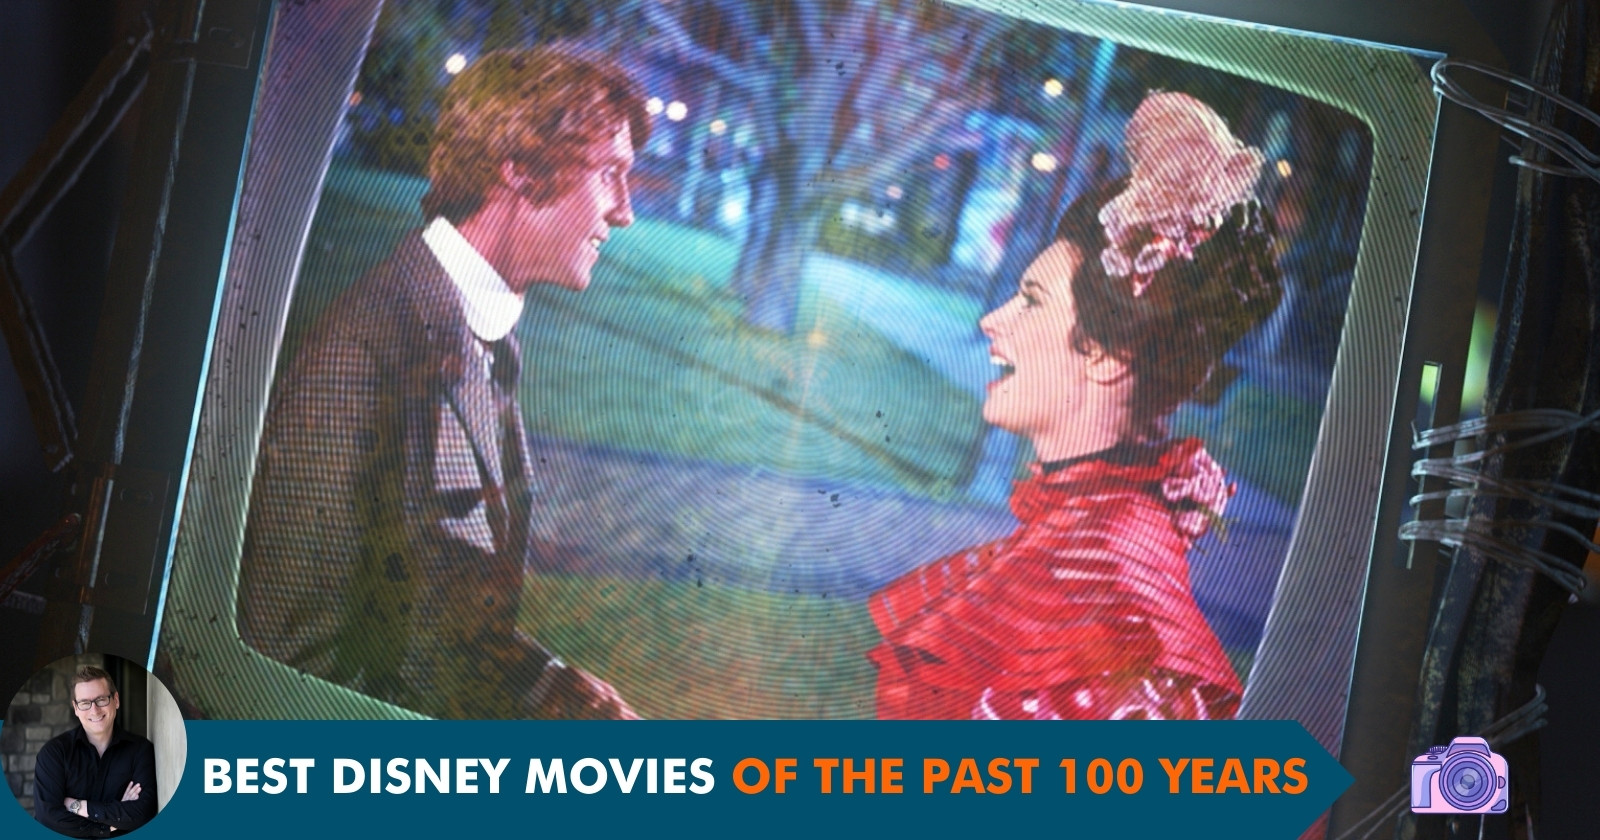 Best Disney Movies of the Past 100 Years